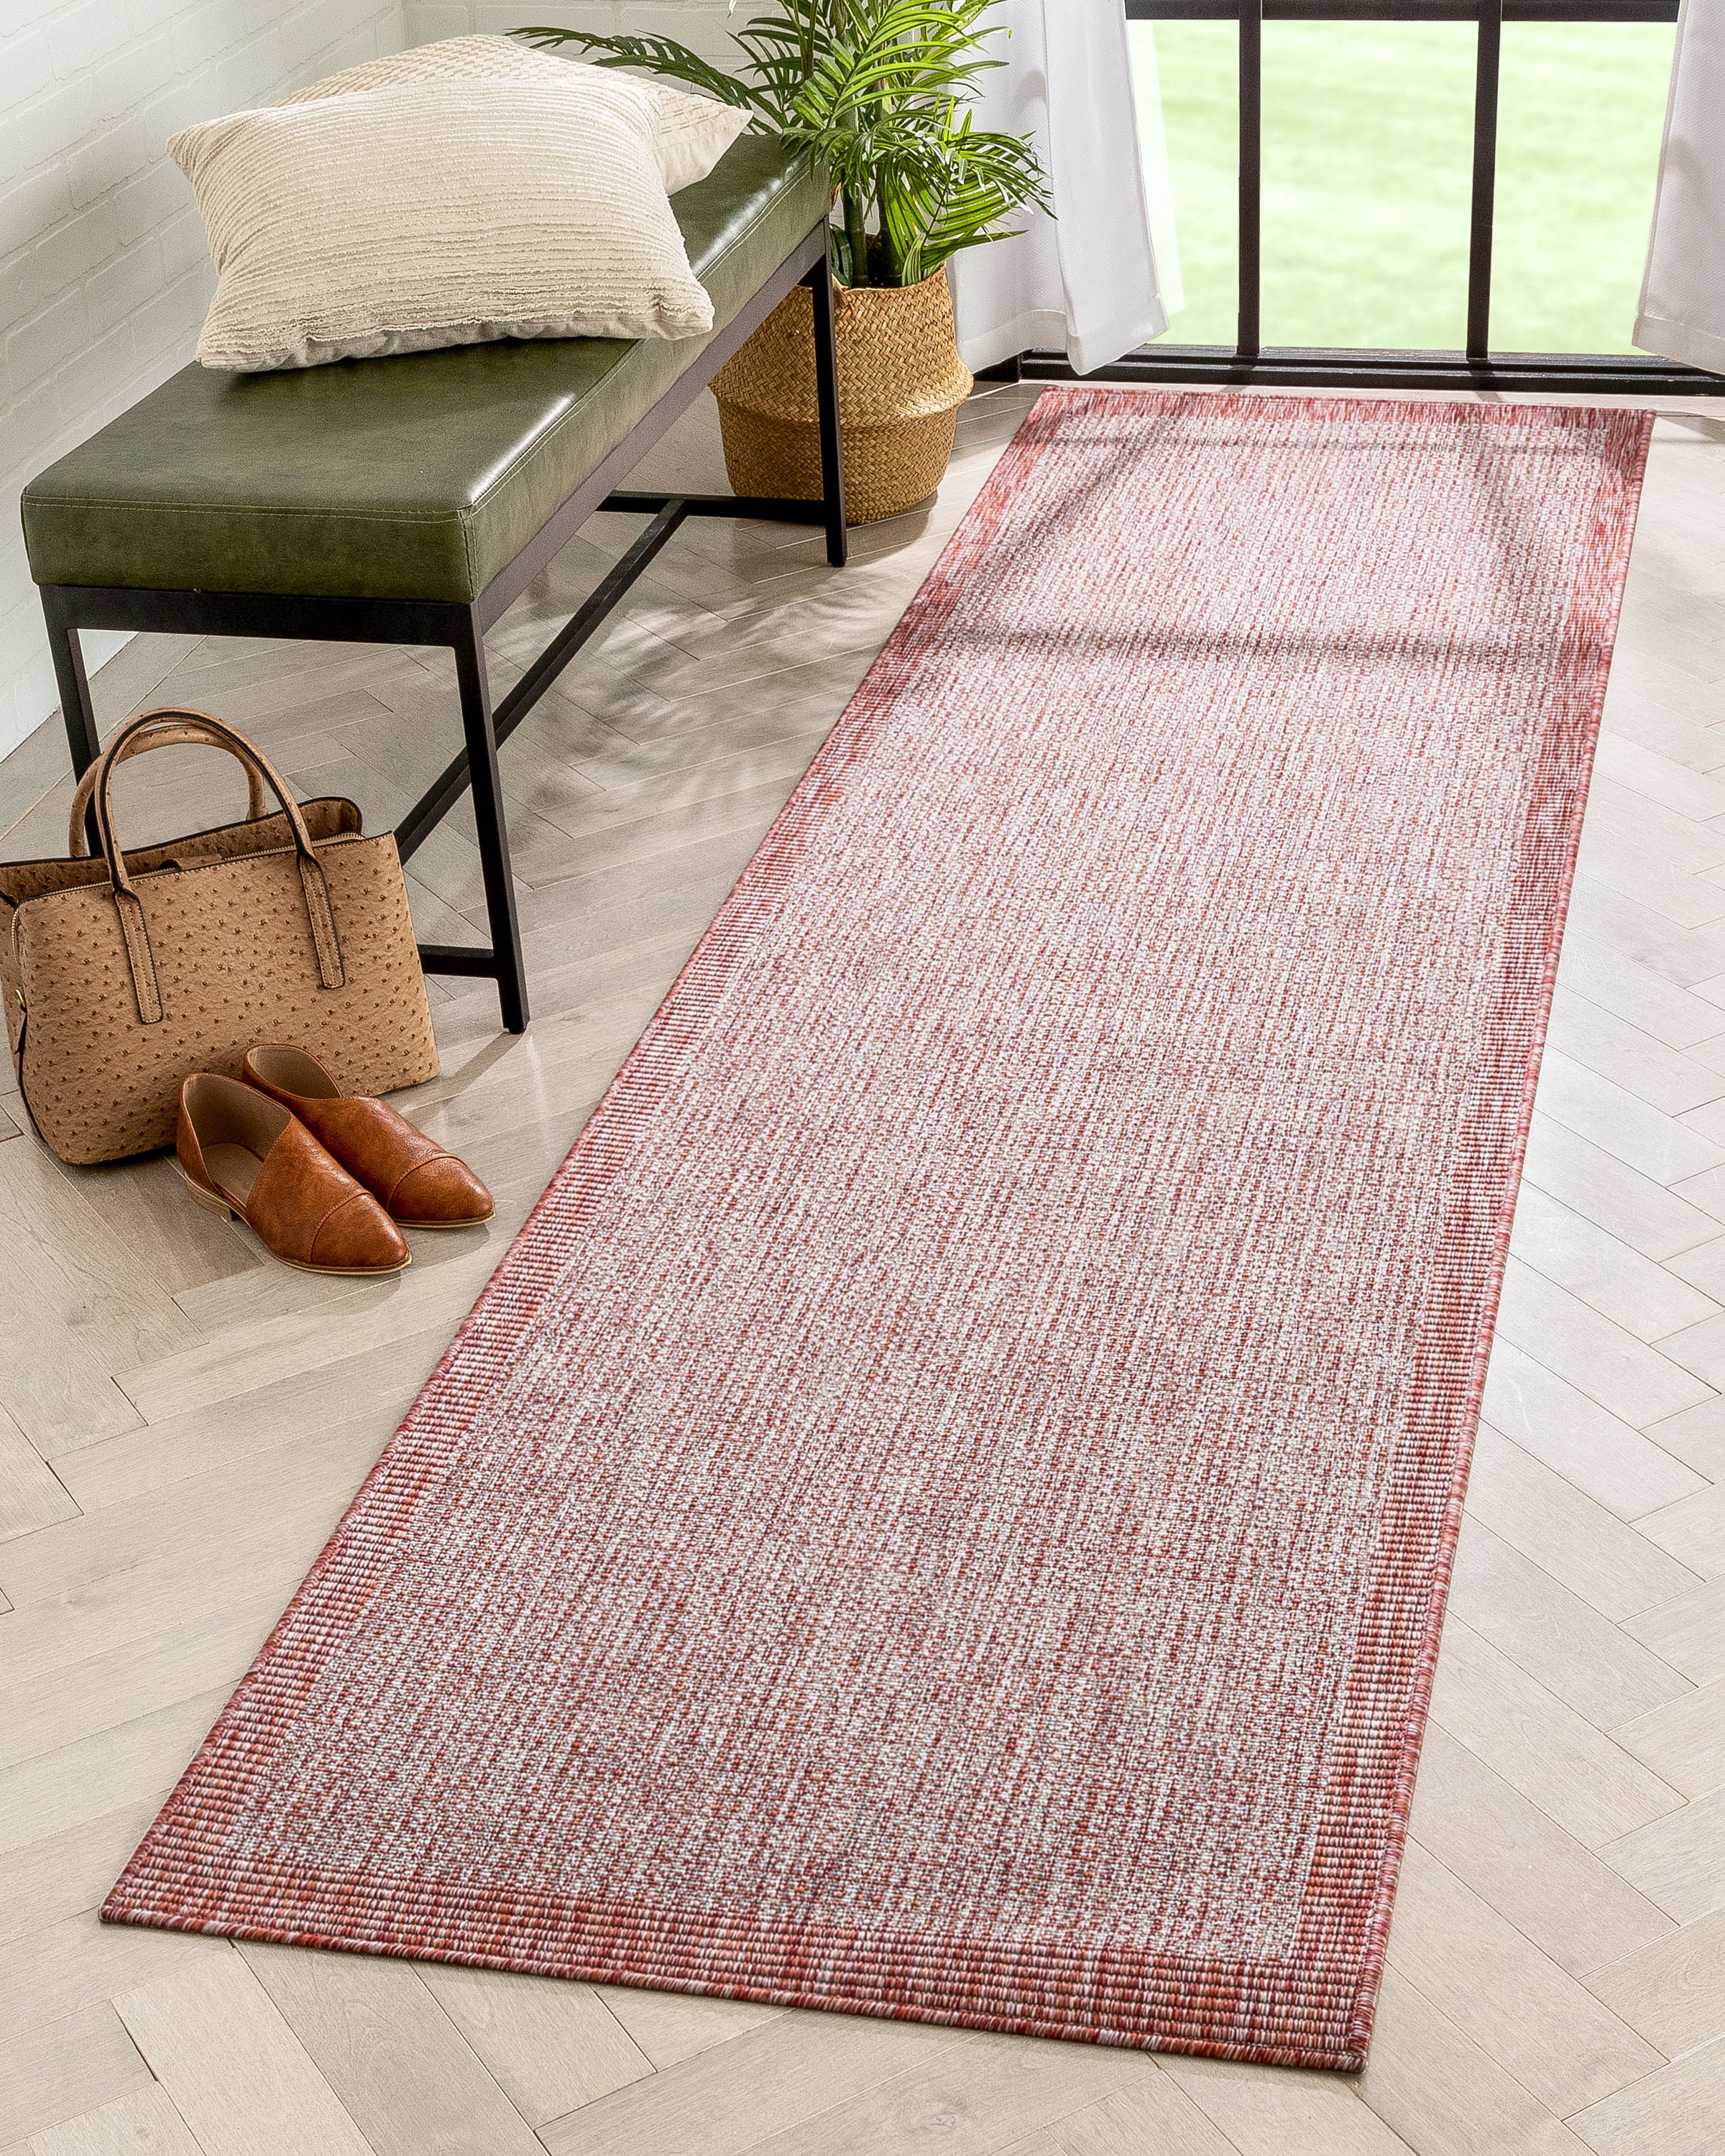 7'10 x 9'10 Well Woven Woden Grey Ivory Indoor/Outdoor Flat Weave Pile Solid Color Border Pattern Area Rug 8x10 